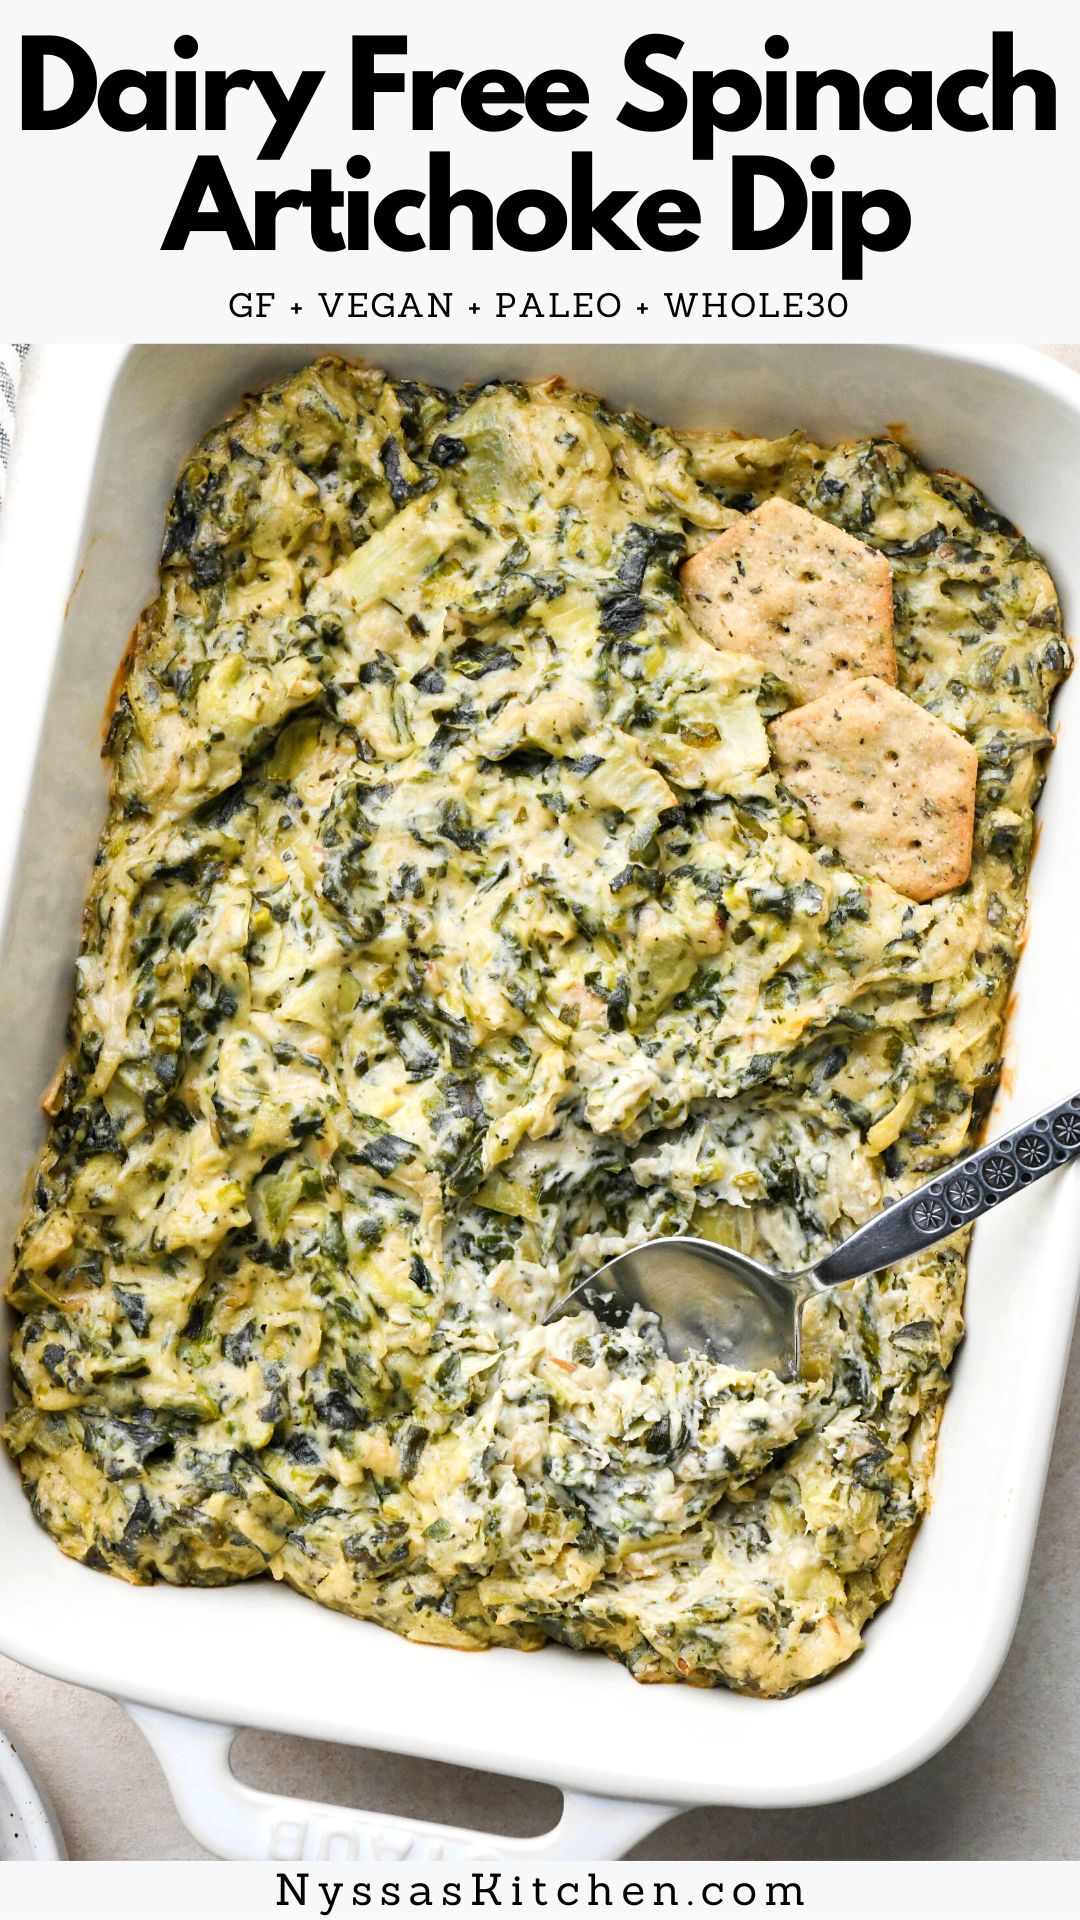 This dairy free spinach artichoke dip is a super luscious (healthy!) version of this classic snack dip. Served warm, and made with raw cashews, artichokes, spinach, and a variety of whole food flavor boosters for a recipe that everyone will enjoy! Made without mayonnaise, cream cheese, sour cream, or store bought vegan cheese. Vegan, Whole30, lactose free, and paleo.